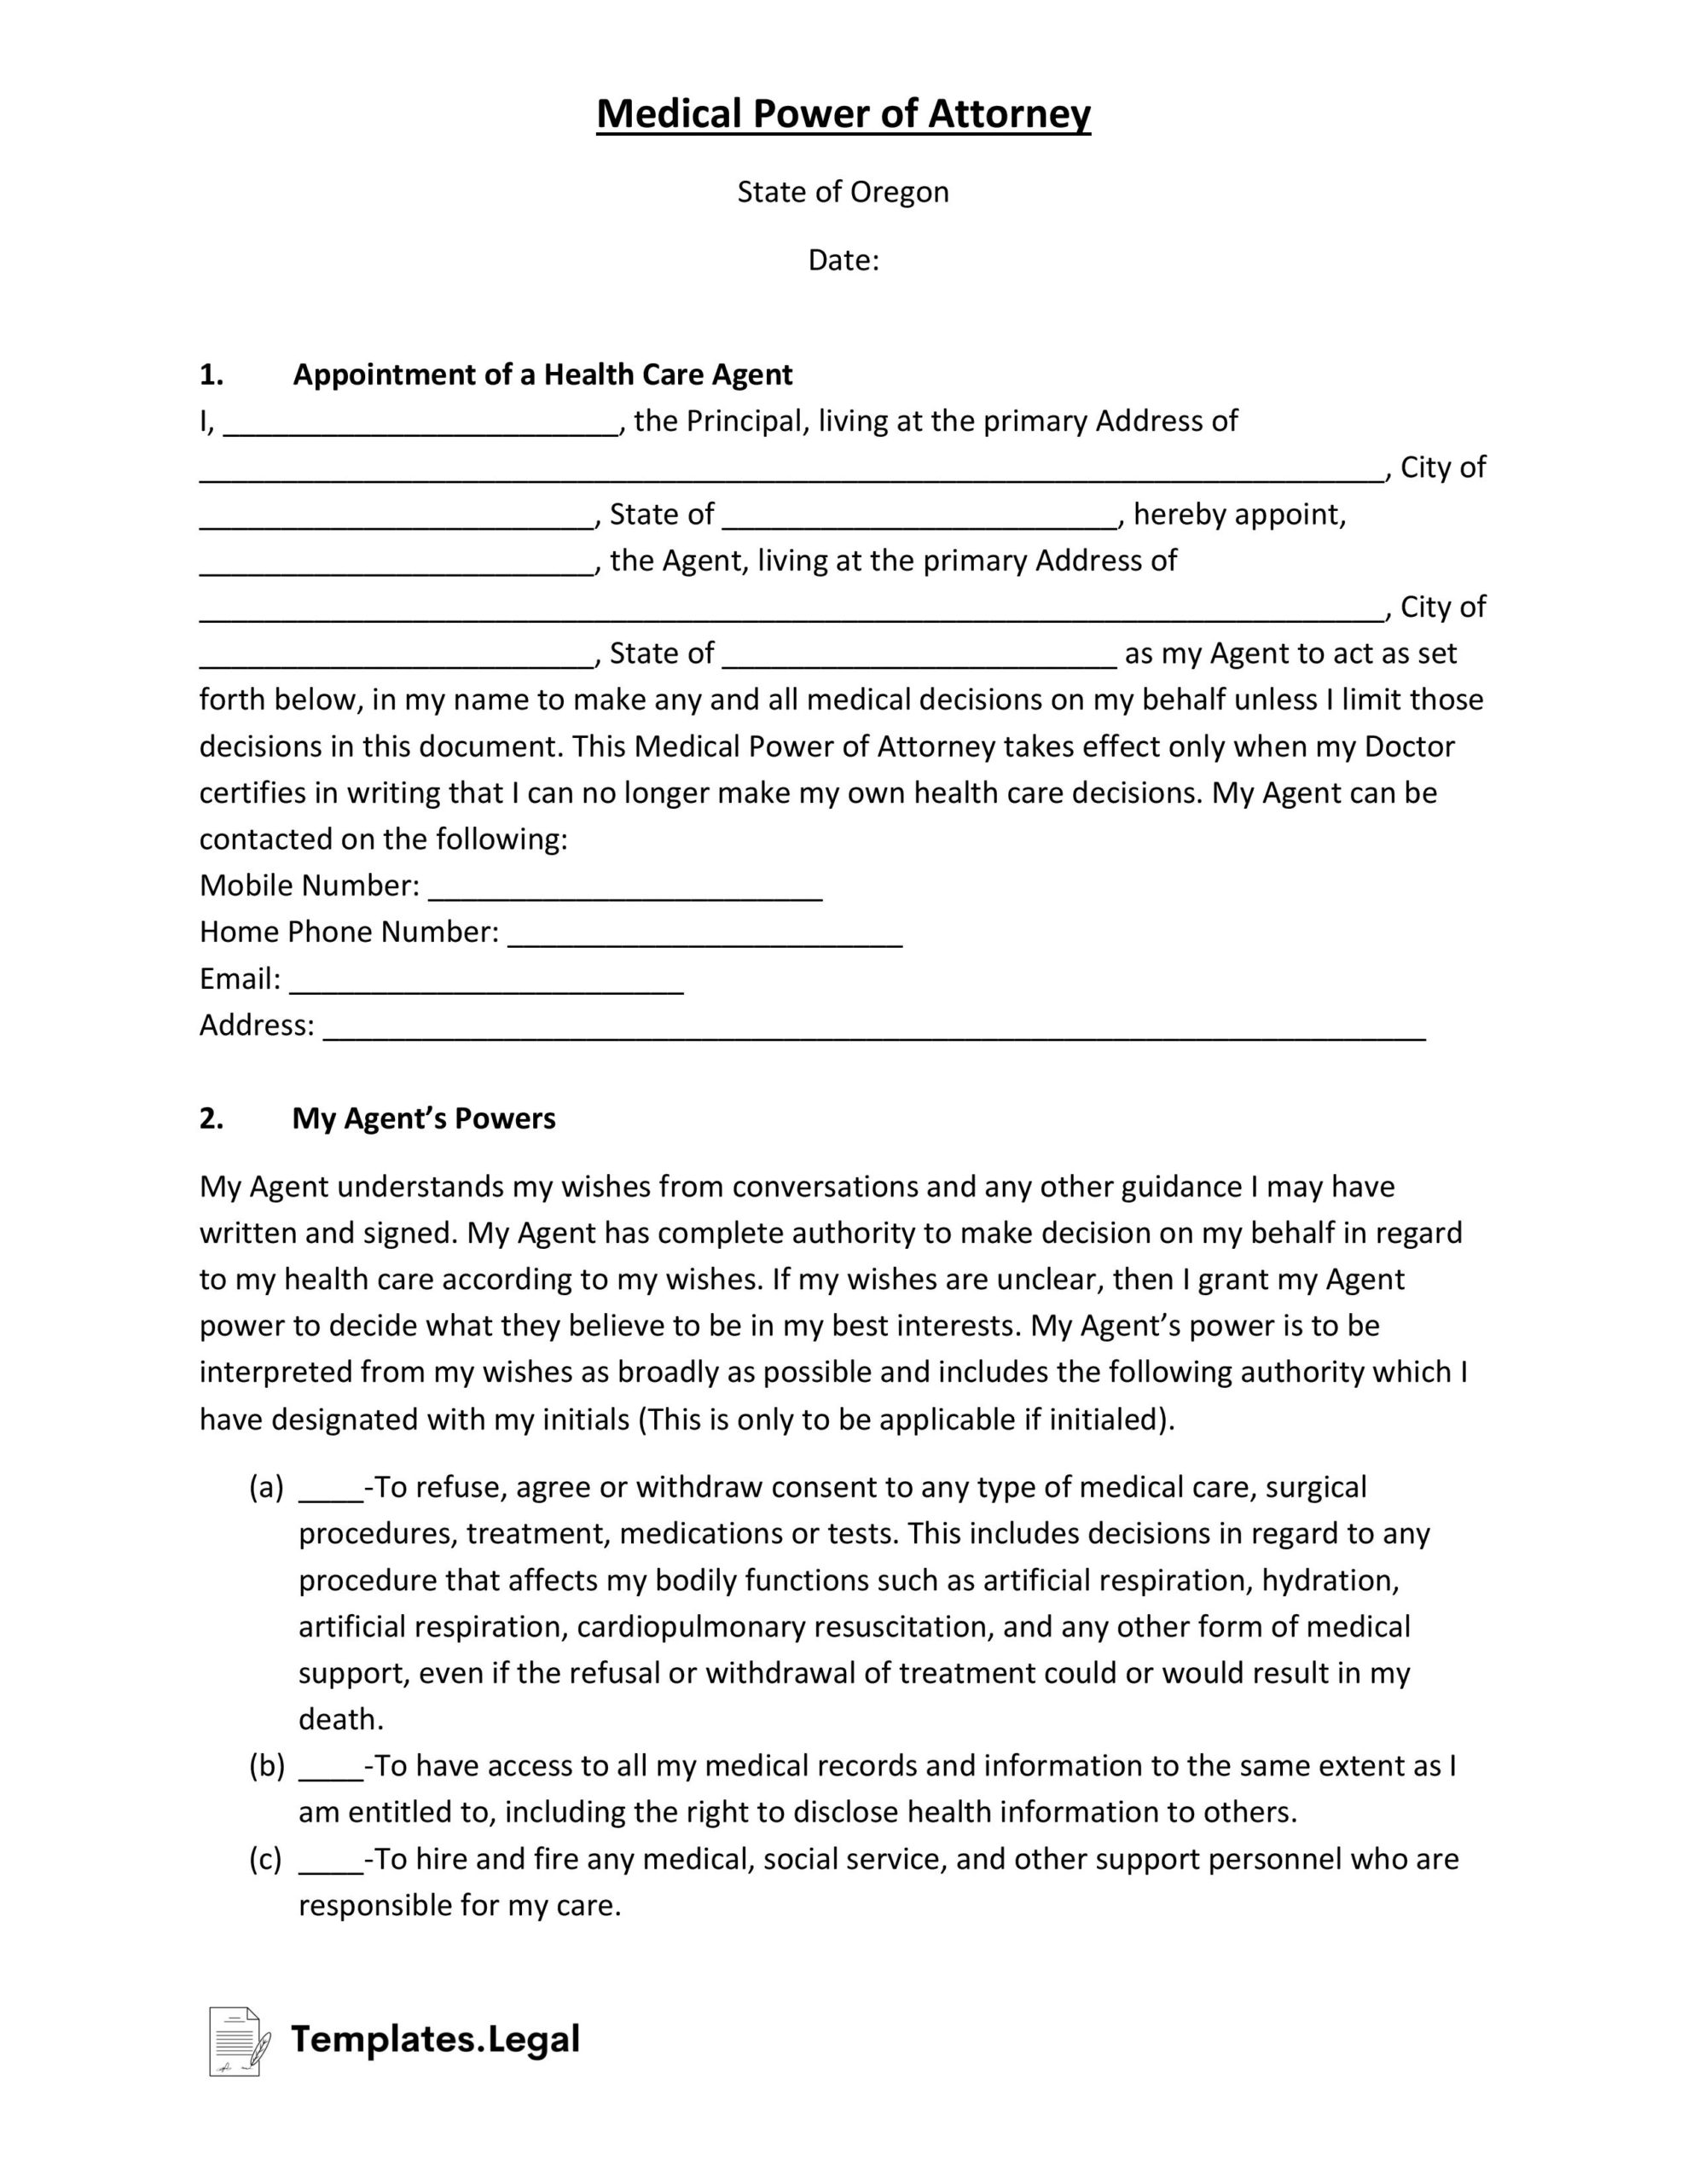 Oregon Medical Power of Attorney- Templates.Legal